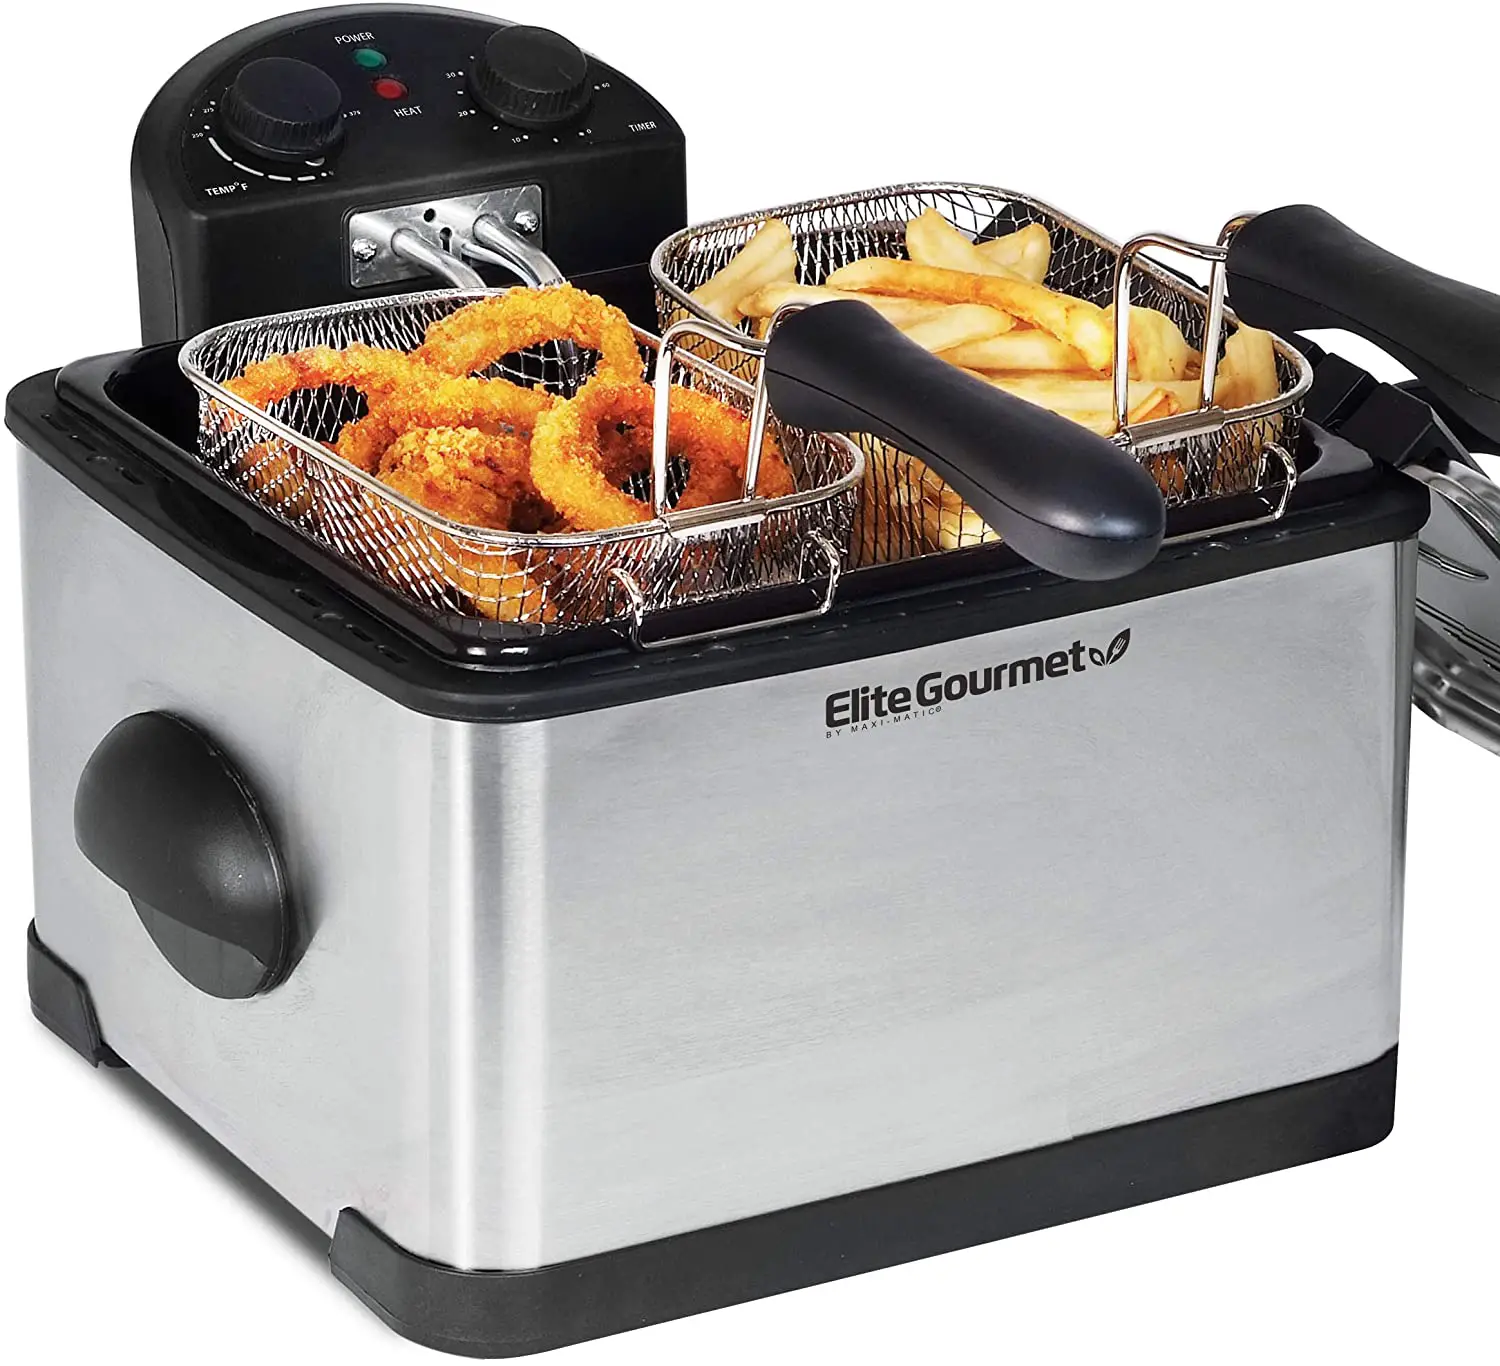 How Long Does A Deep Fryer Take To Heat Up?